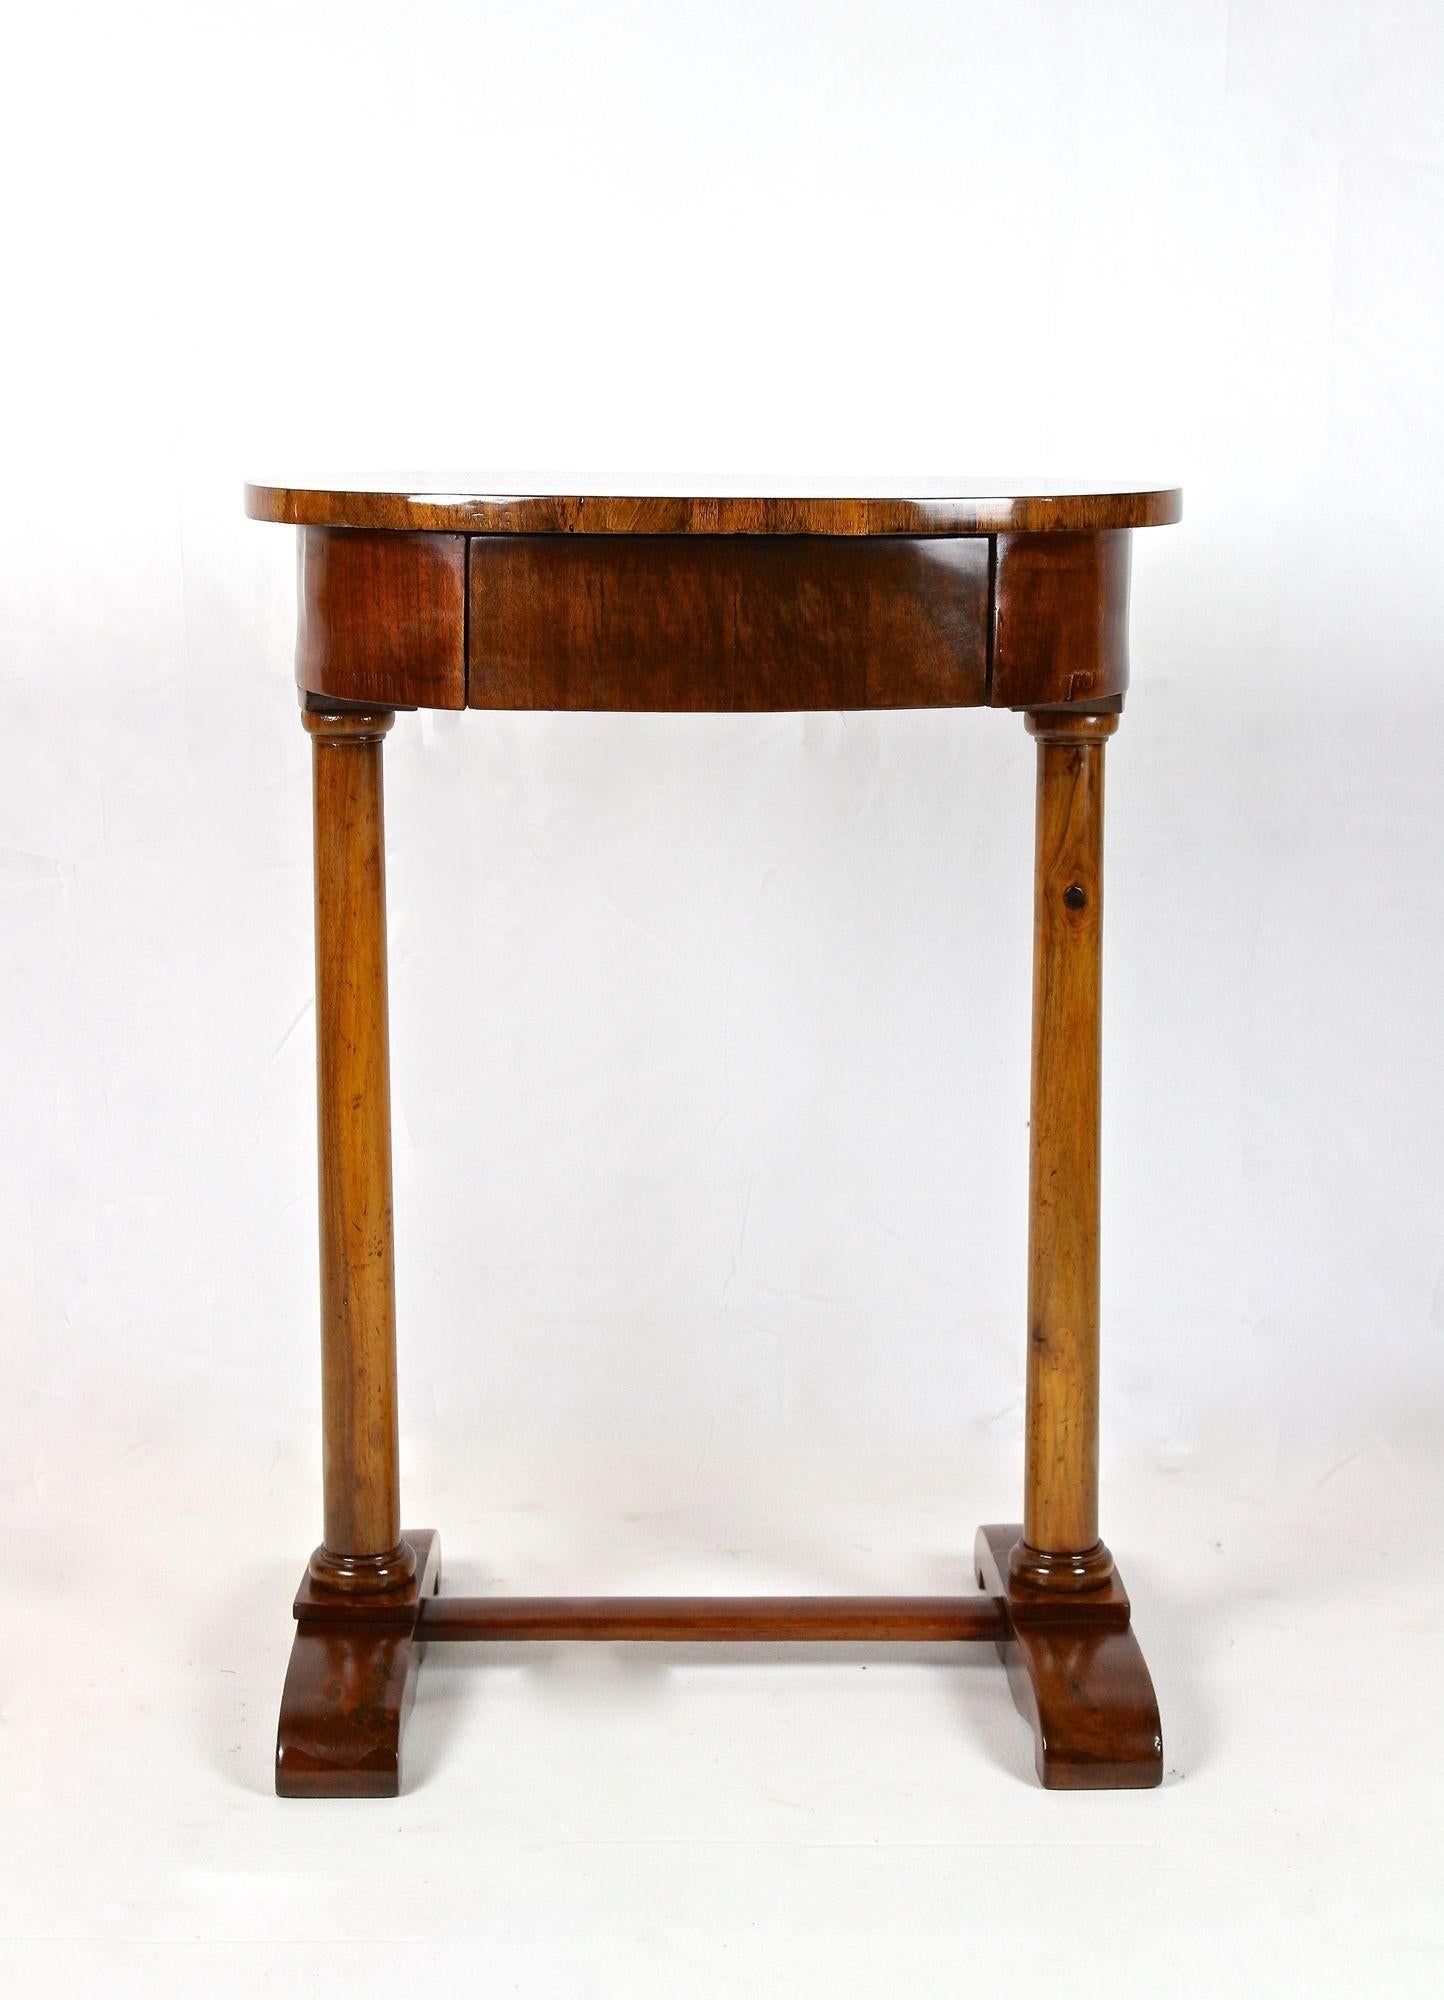 Oval 19th Century Biedermeier Nutwood Side Table, Austria, circa 1830 In Good Condition For Sale In Lichtenberg, AT